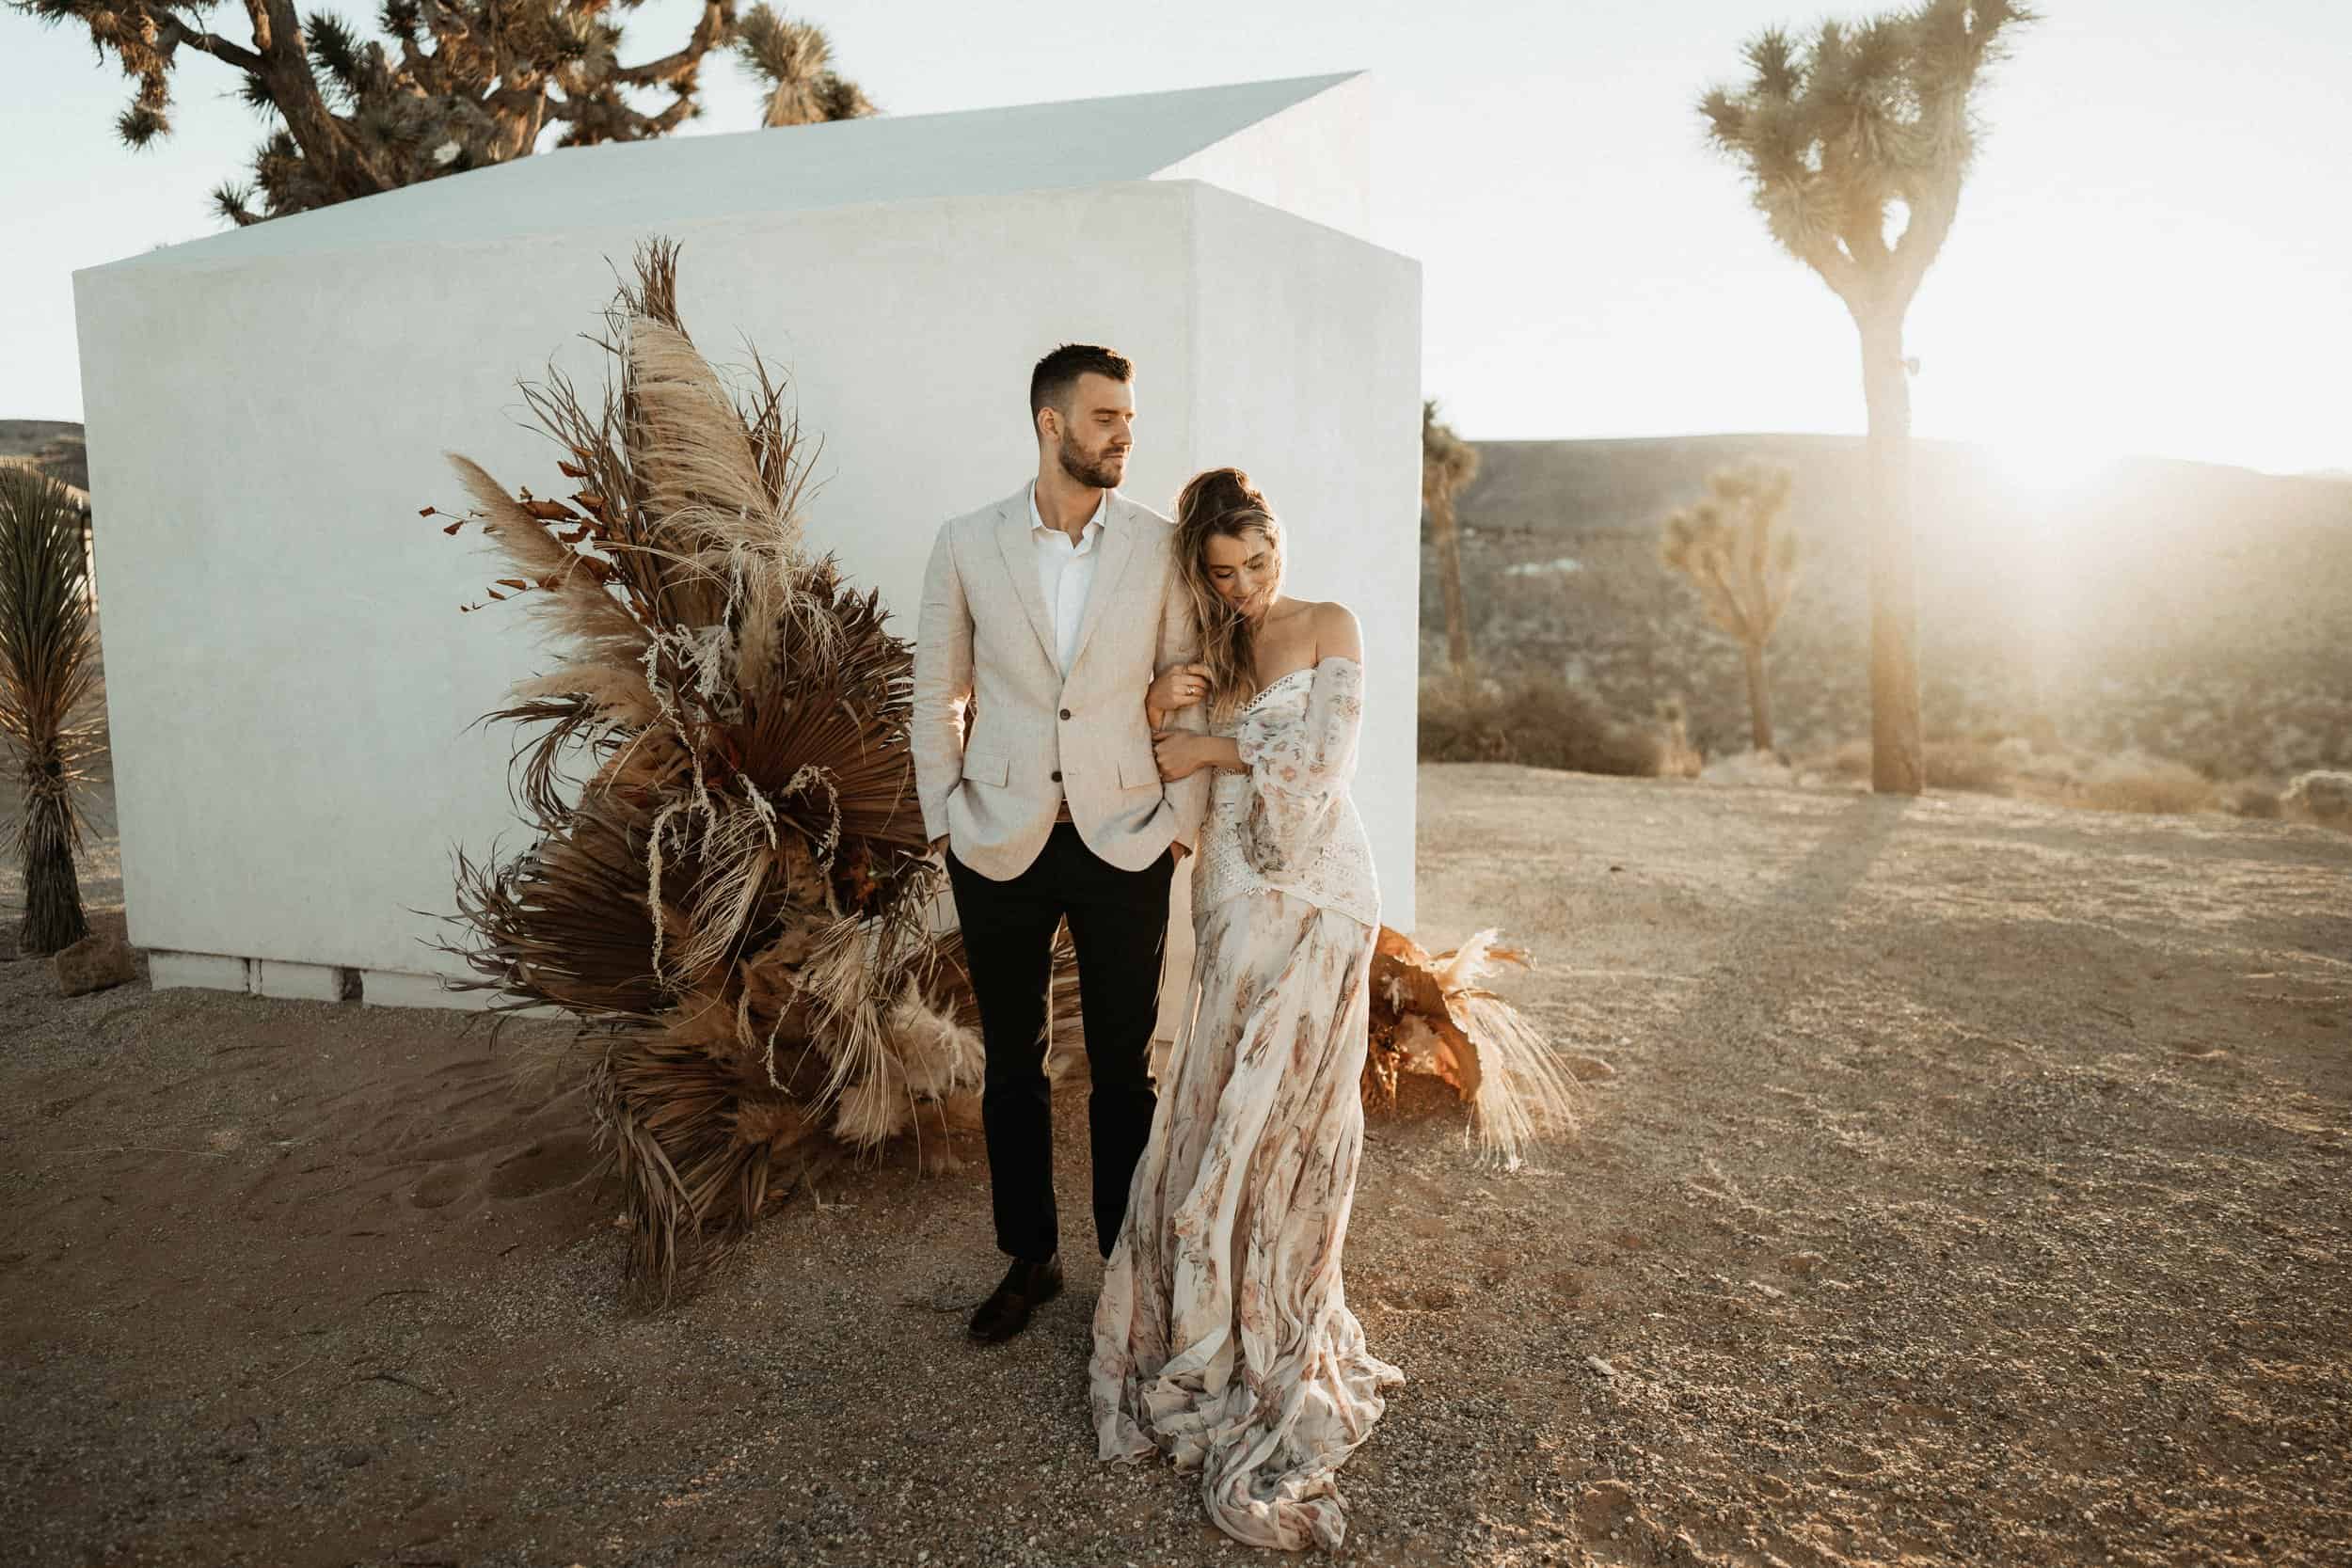 Where to Stay for your Joshua Tree Elopement